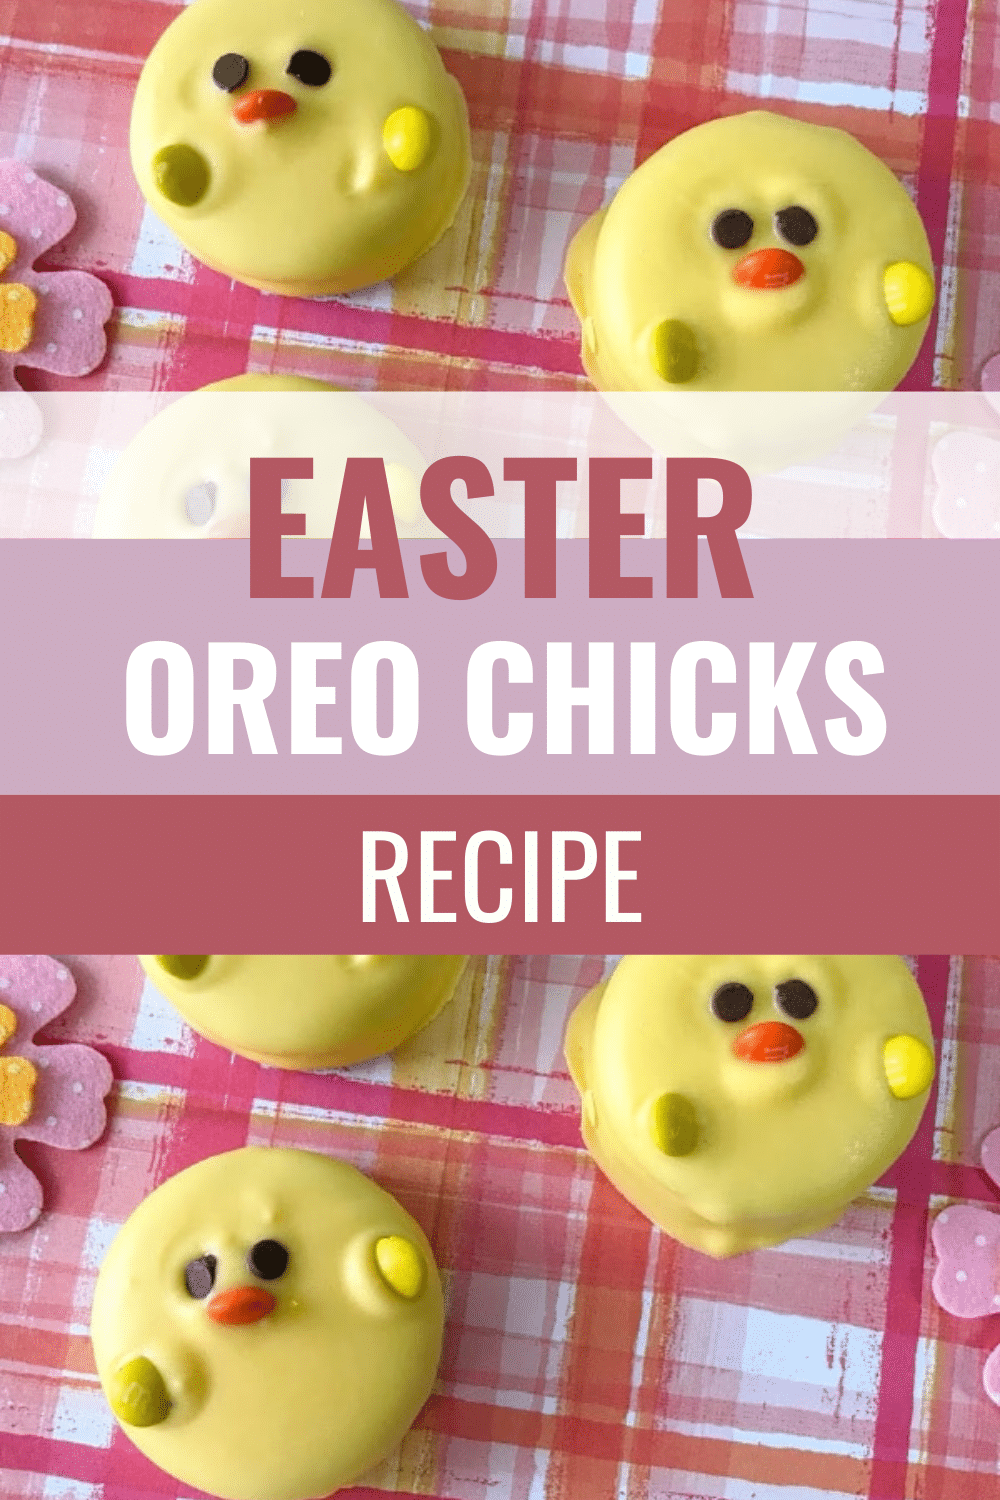 Easter Oreo Chicks are easy spring treats made with Double Stuf Oreo cookies. These bright yellow chick cookies are quick to make and kids love them! #easter #oreos #eastertreats via @wondermomwannab